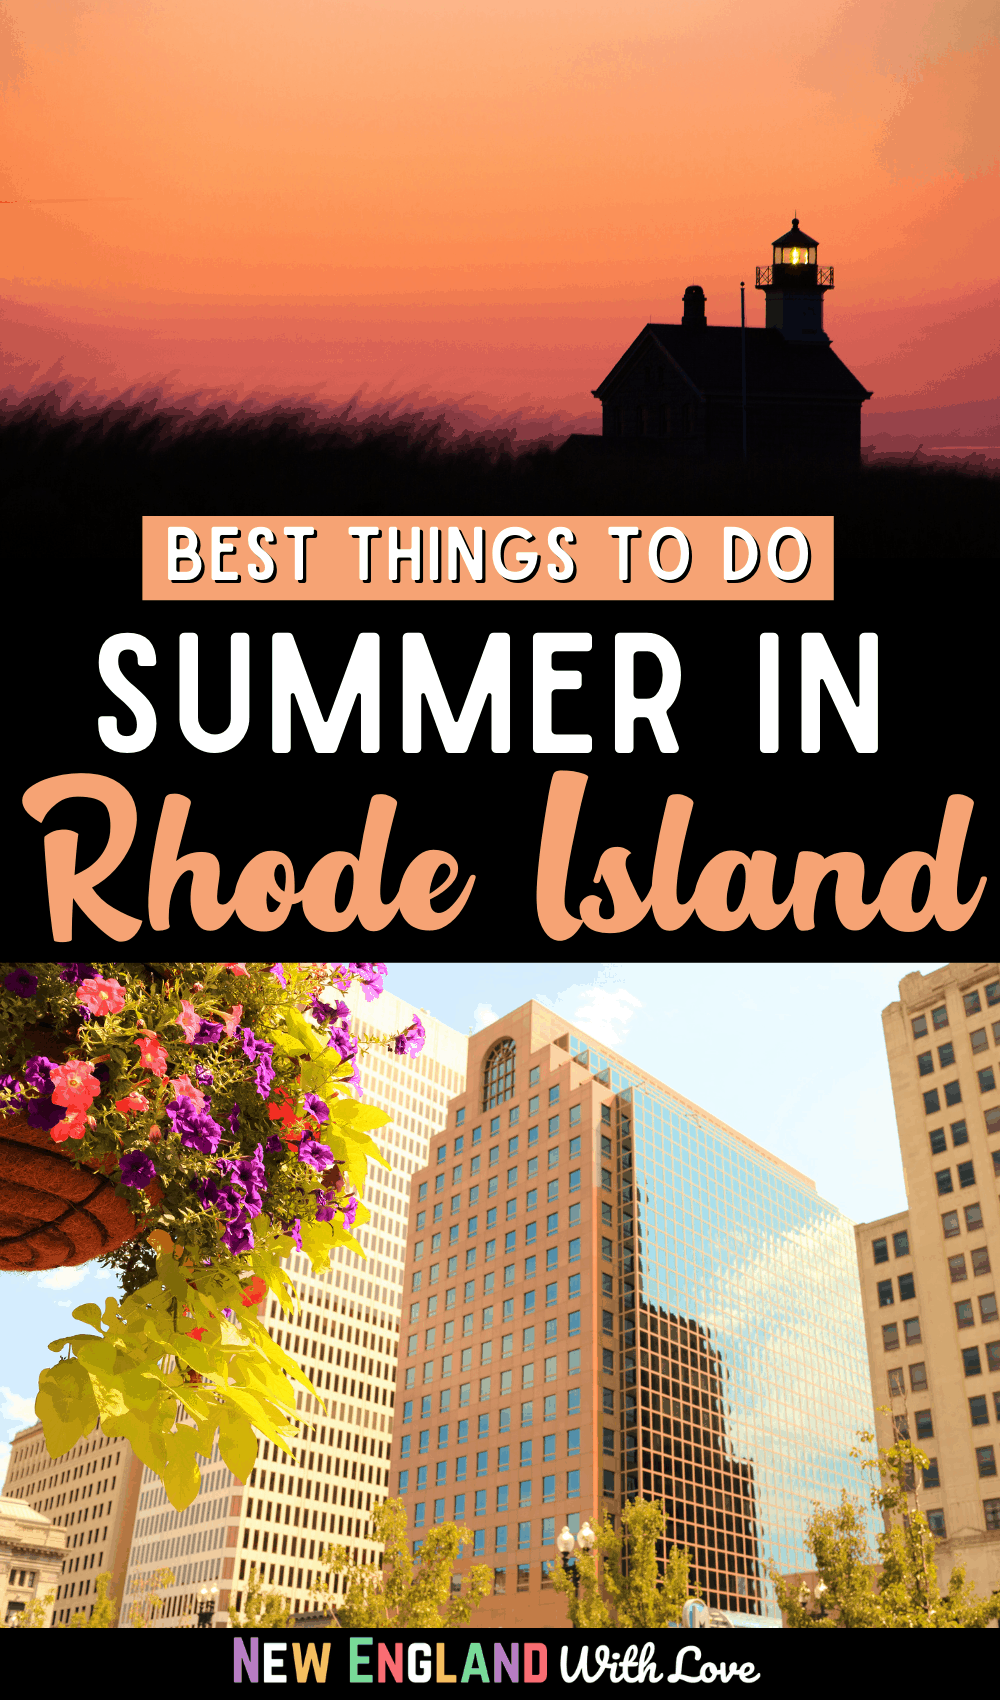 Pinterest graphic reading "Best Things To Do Summer in Rhode Island"